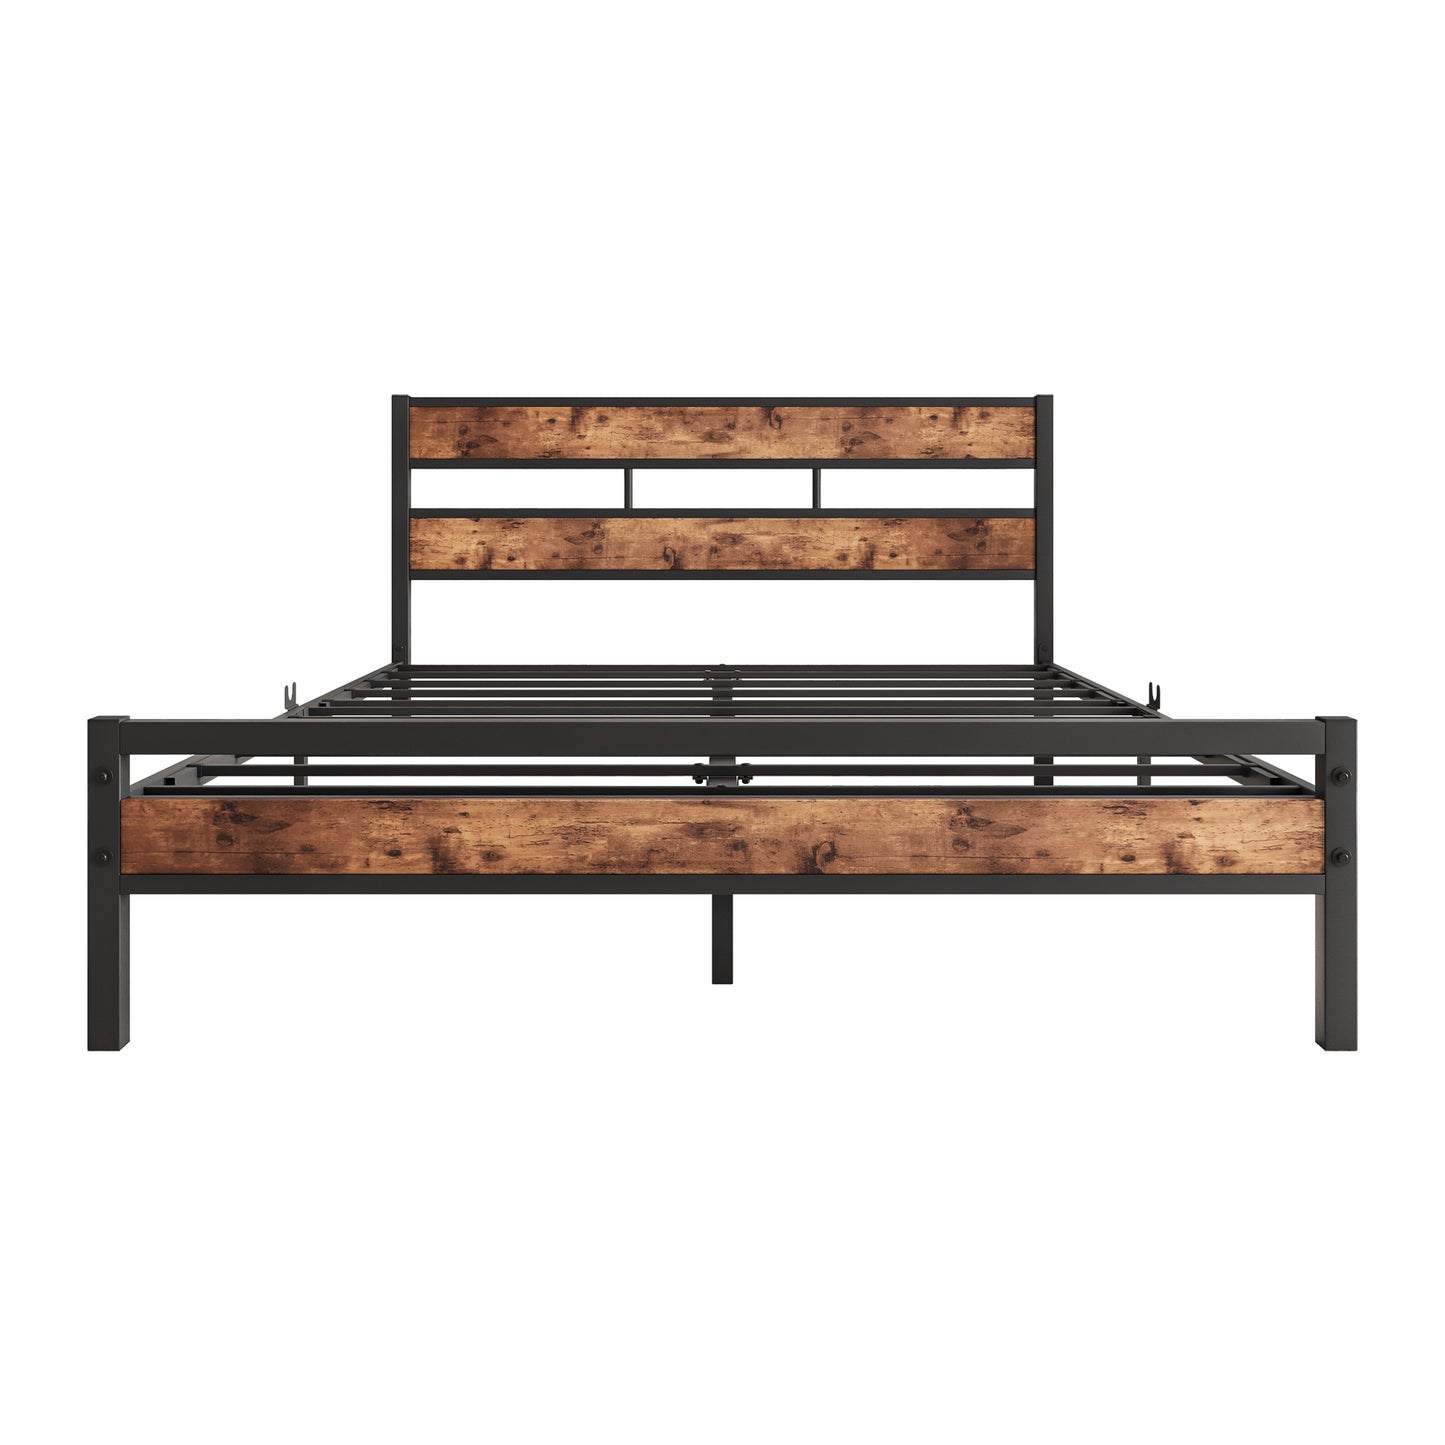 Queen Size Platform Bed Frame with Rustic Vintage Wood Headboard, Strong Metal Slats Support, No Box Spring Needed